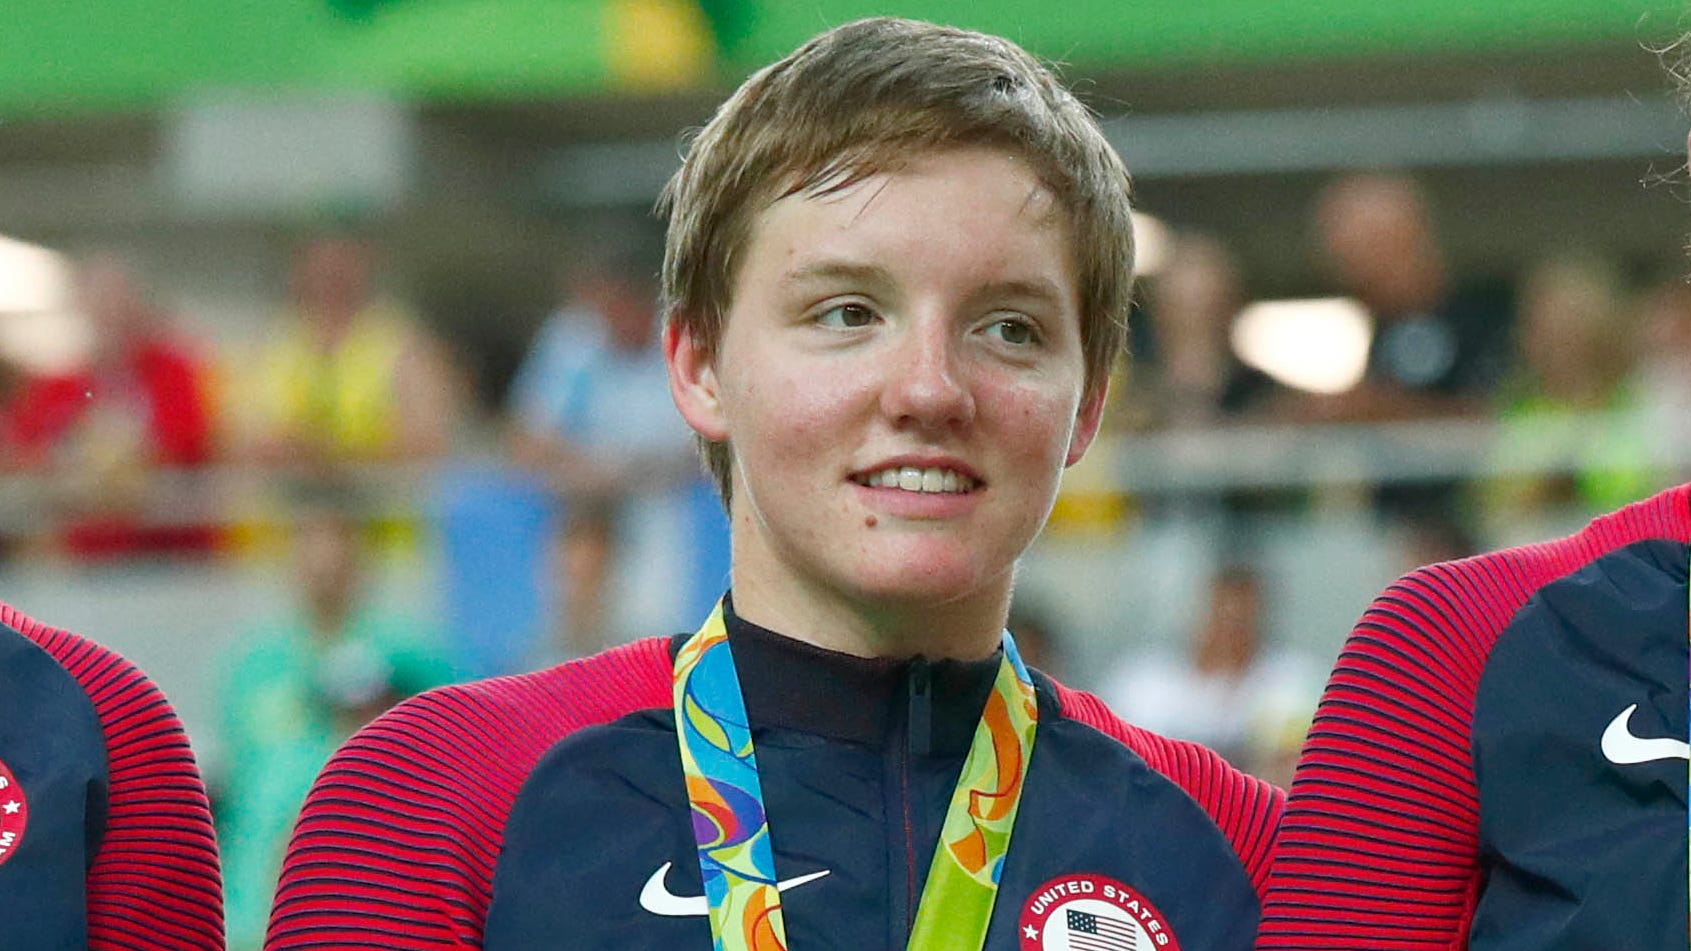 Kelly Catlin Olympic Track Cyclist Dies At 23 